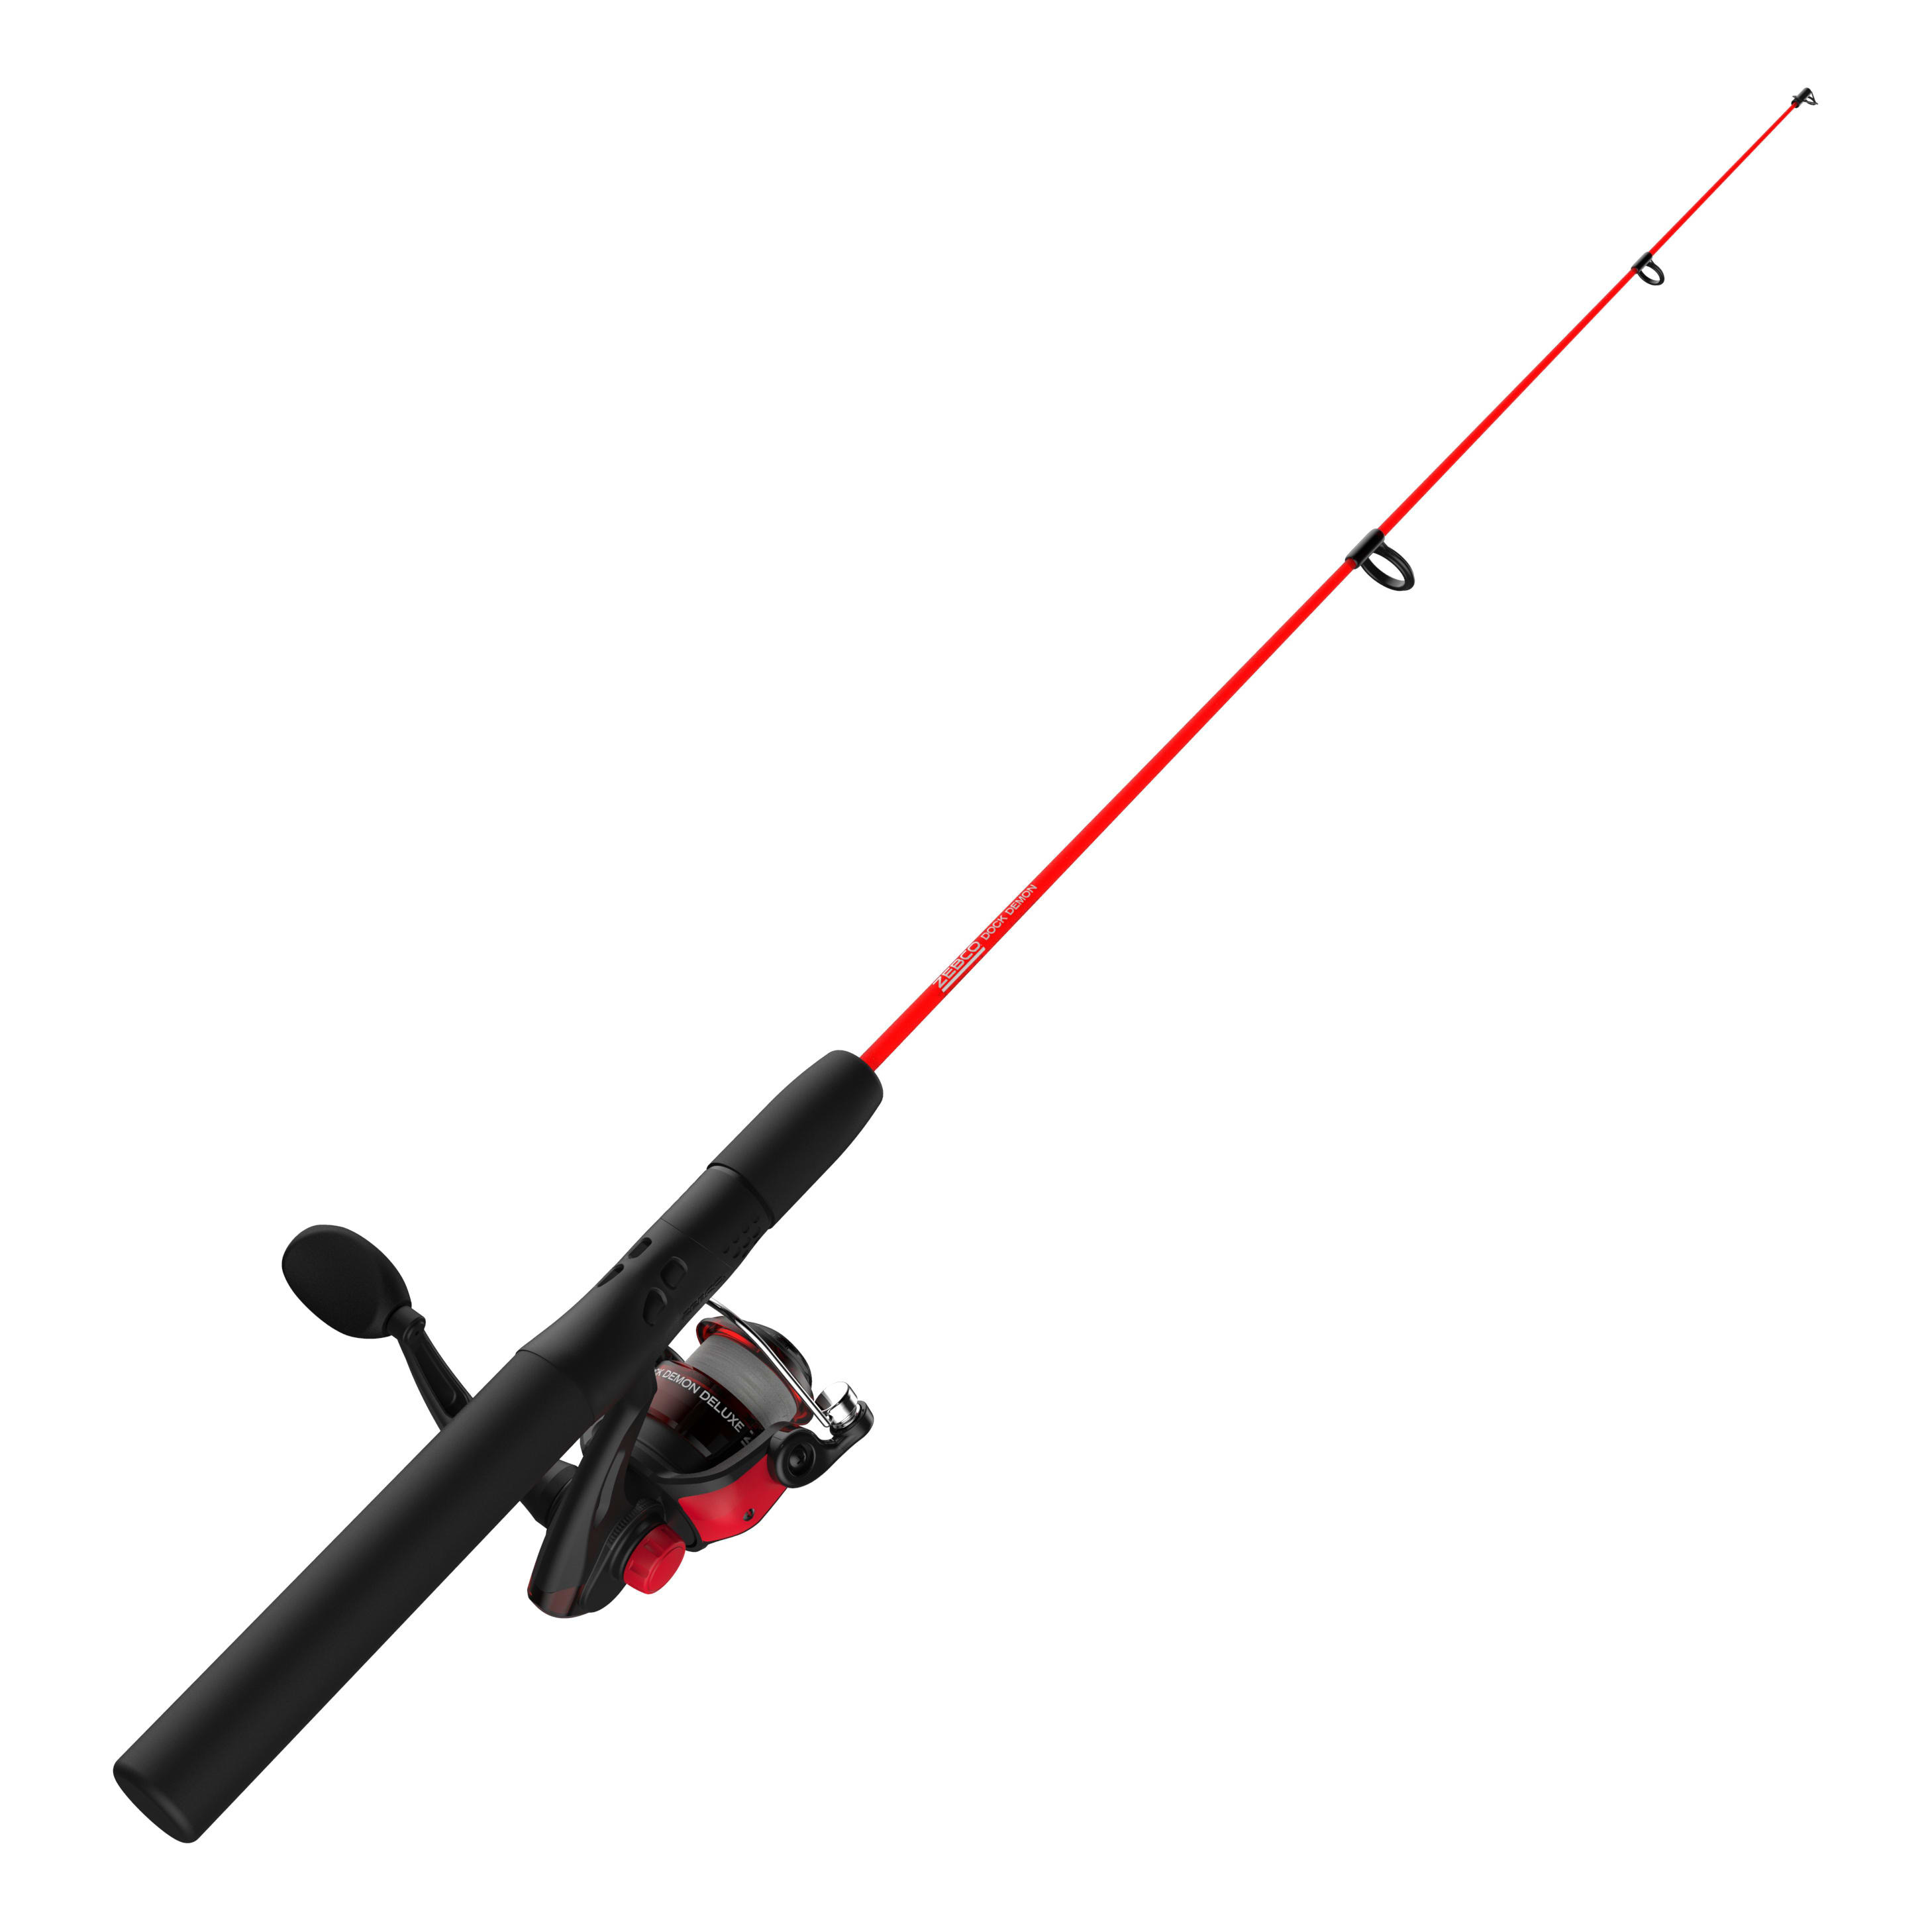 Bass Pro Shops Quick Draw Telescopic Spinning Combo